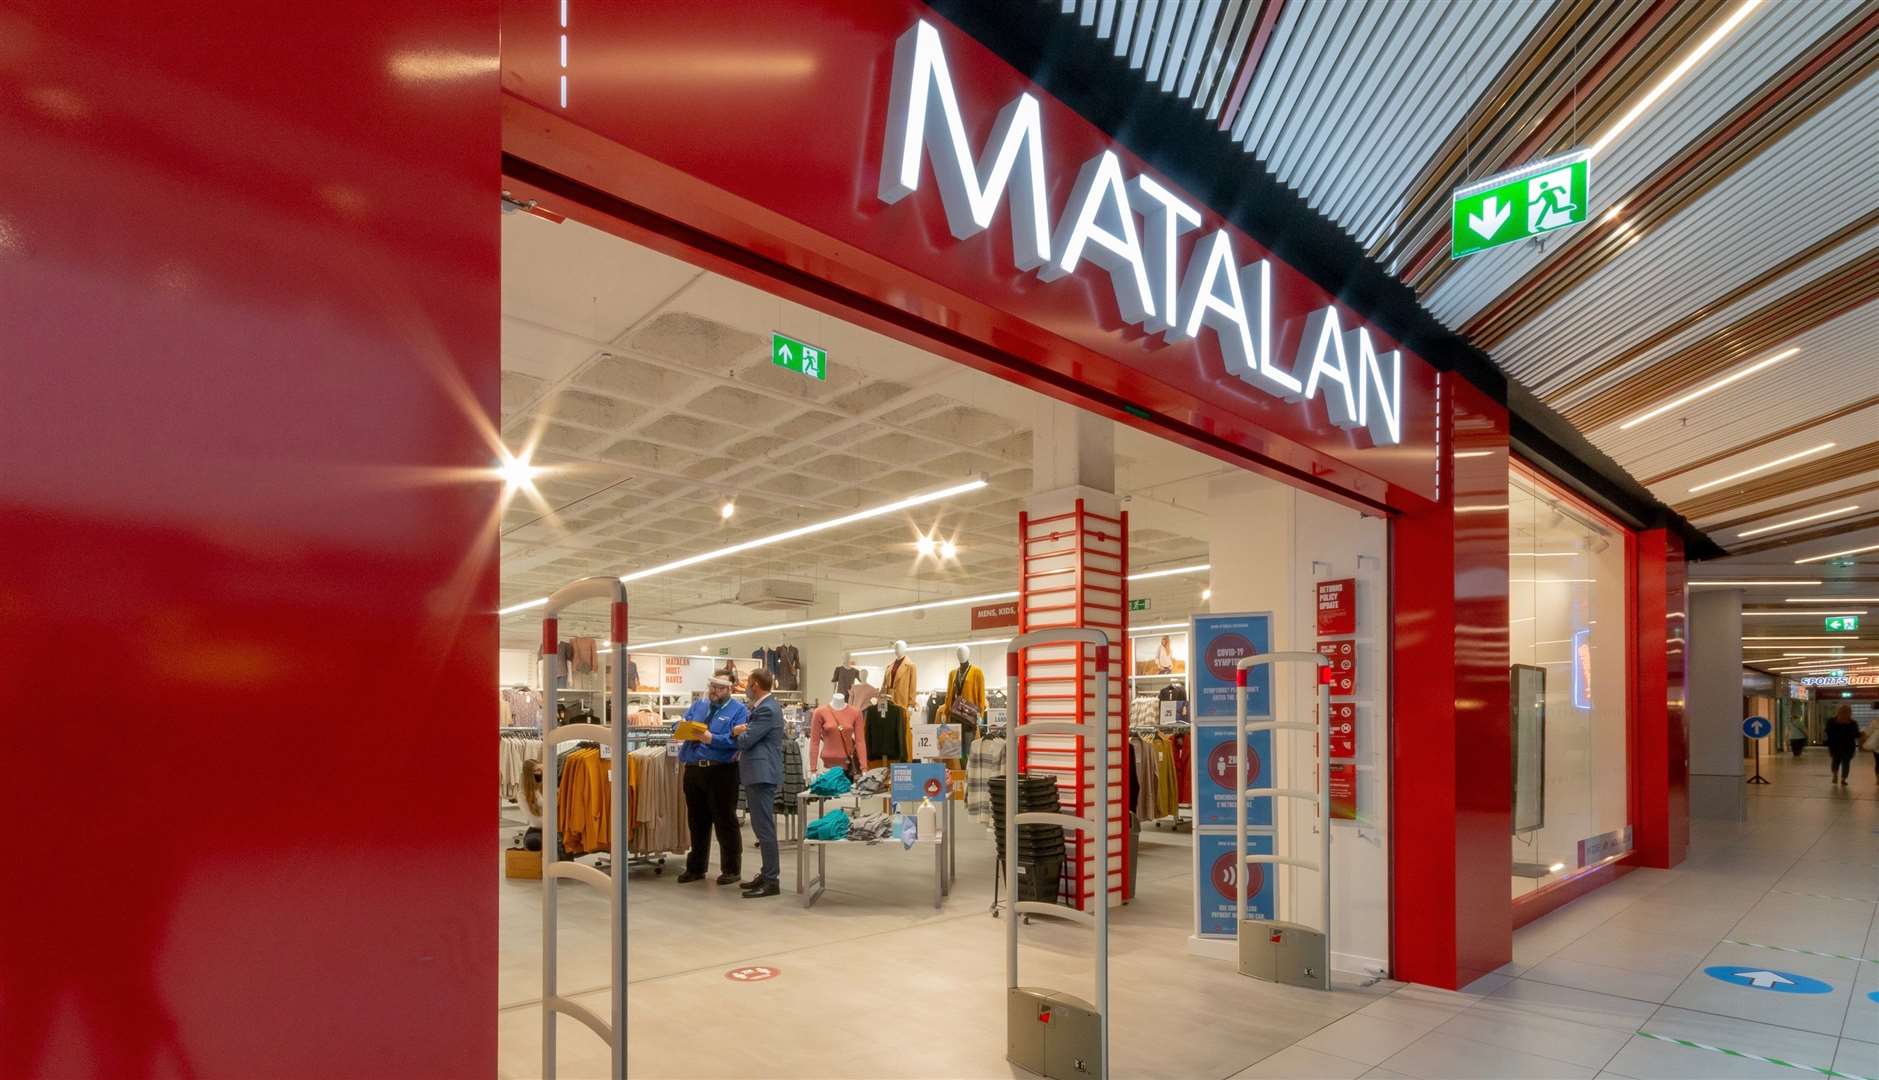 The new Matalan store at The Mall shopping centre in Maidstone